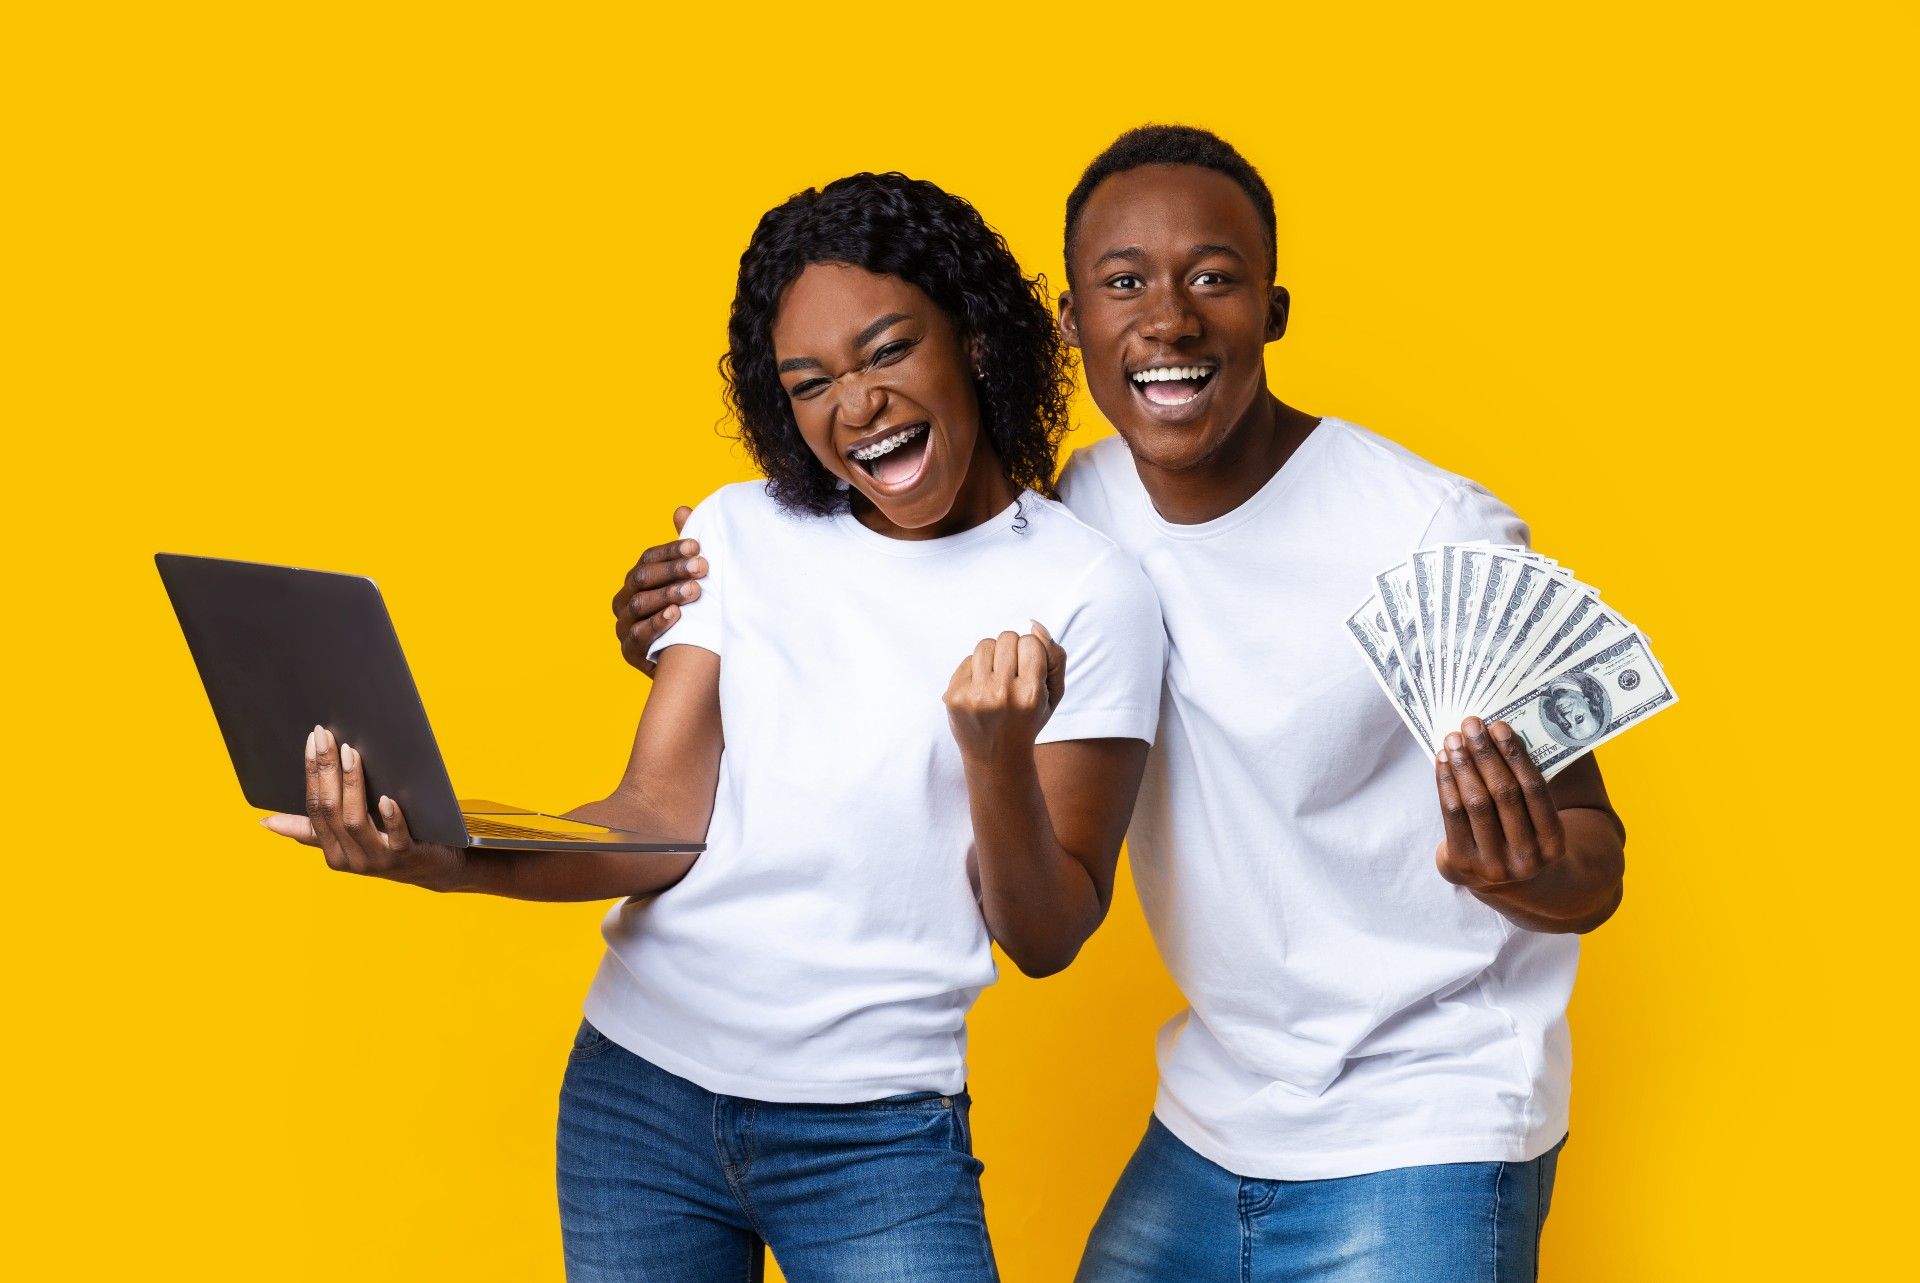 Against a yellow background, a happy woman holds a laptop, while a happy man holds up fanned-out cash - settlement payouts